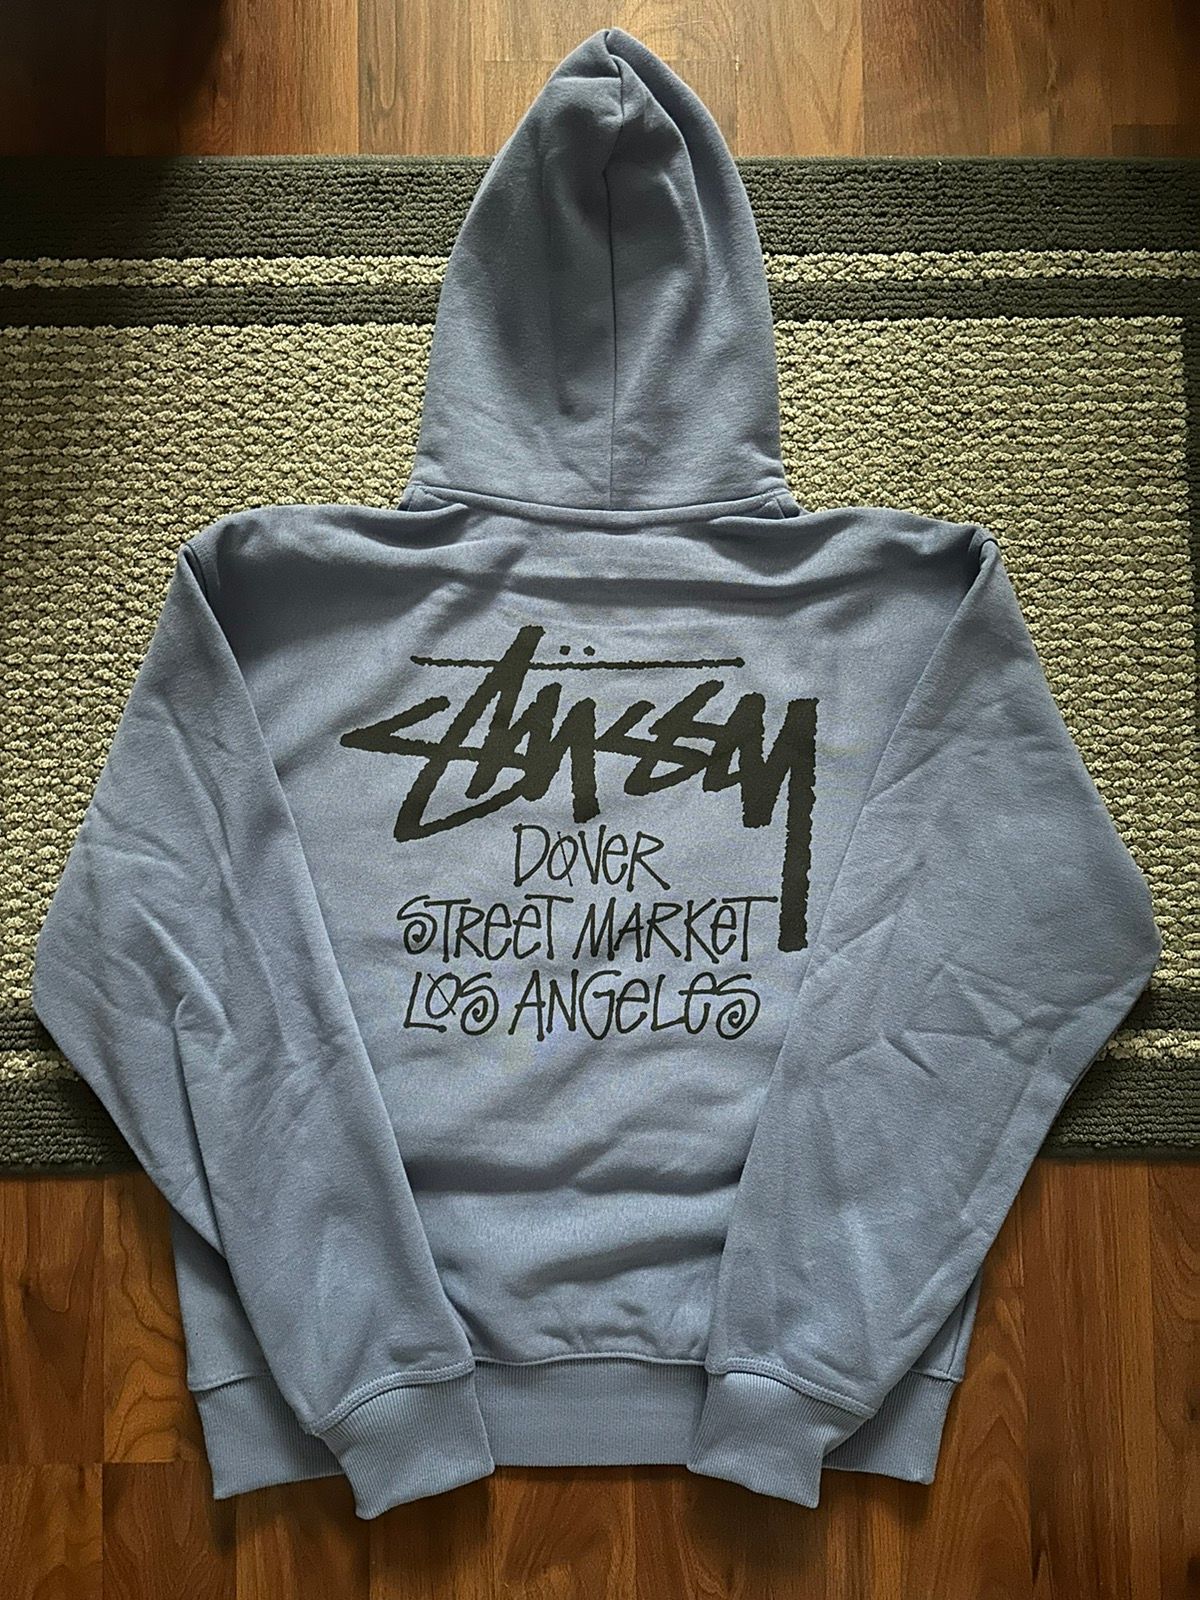 Stussy Blue Stussy Dover Street Market Los Angeles Hoodie Size US L / EU 52-54 / 3 - 1 Preview